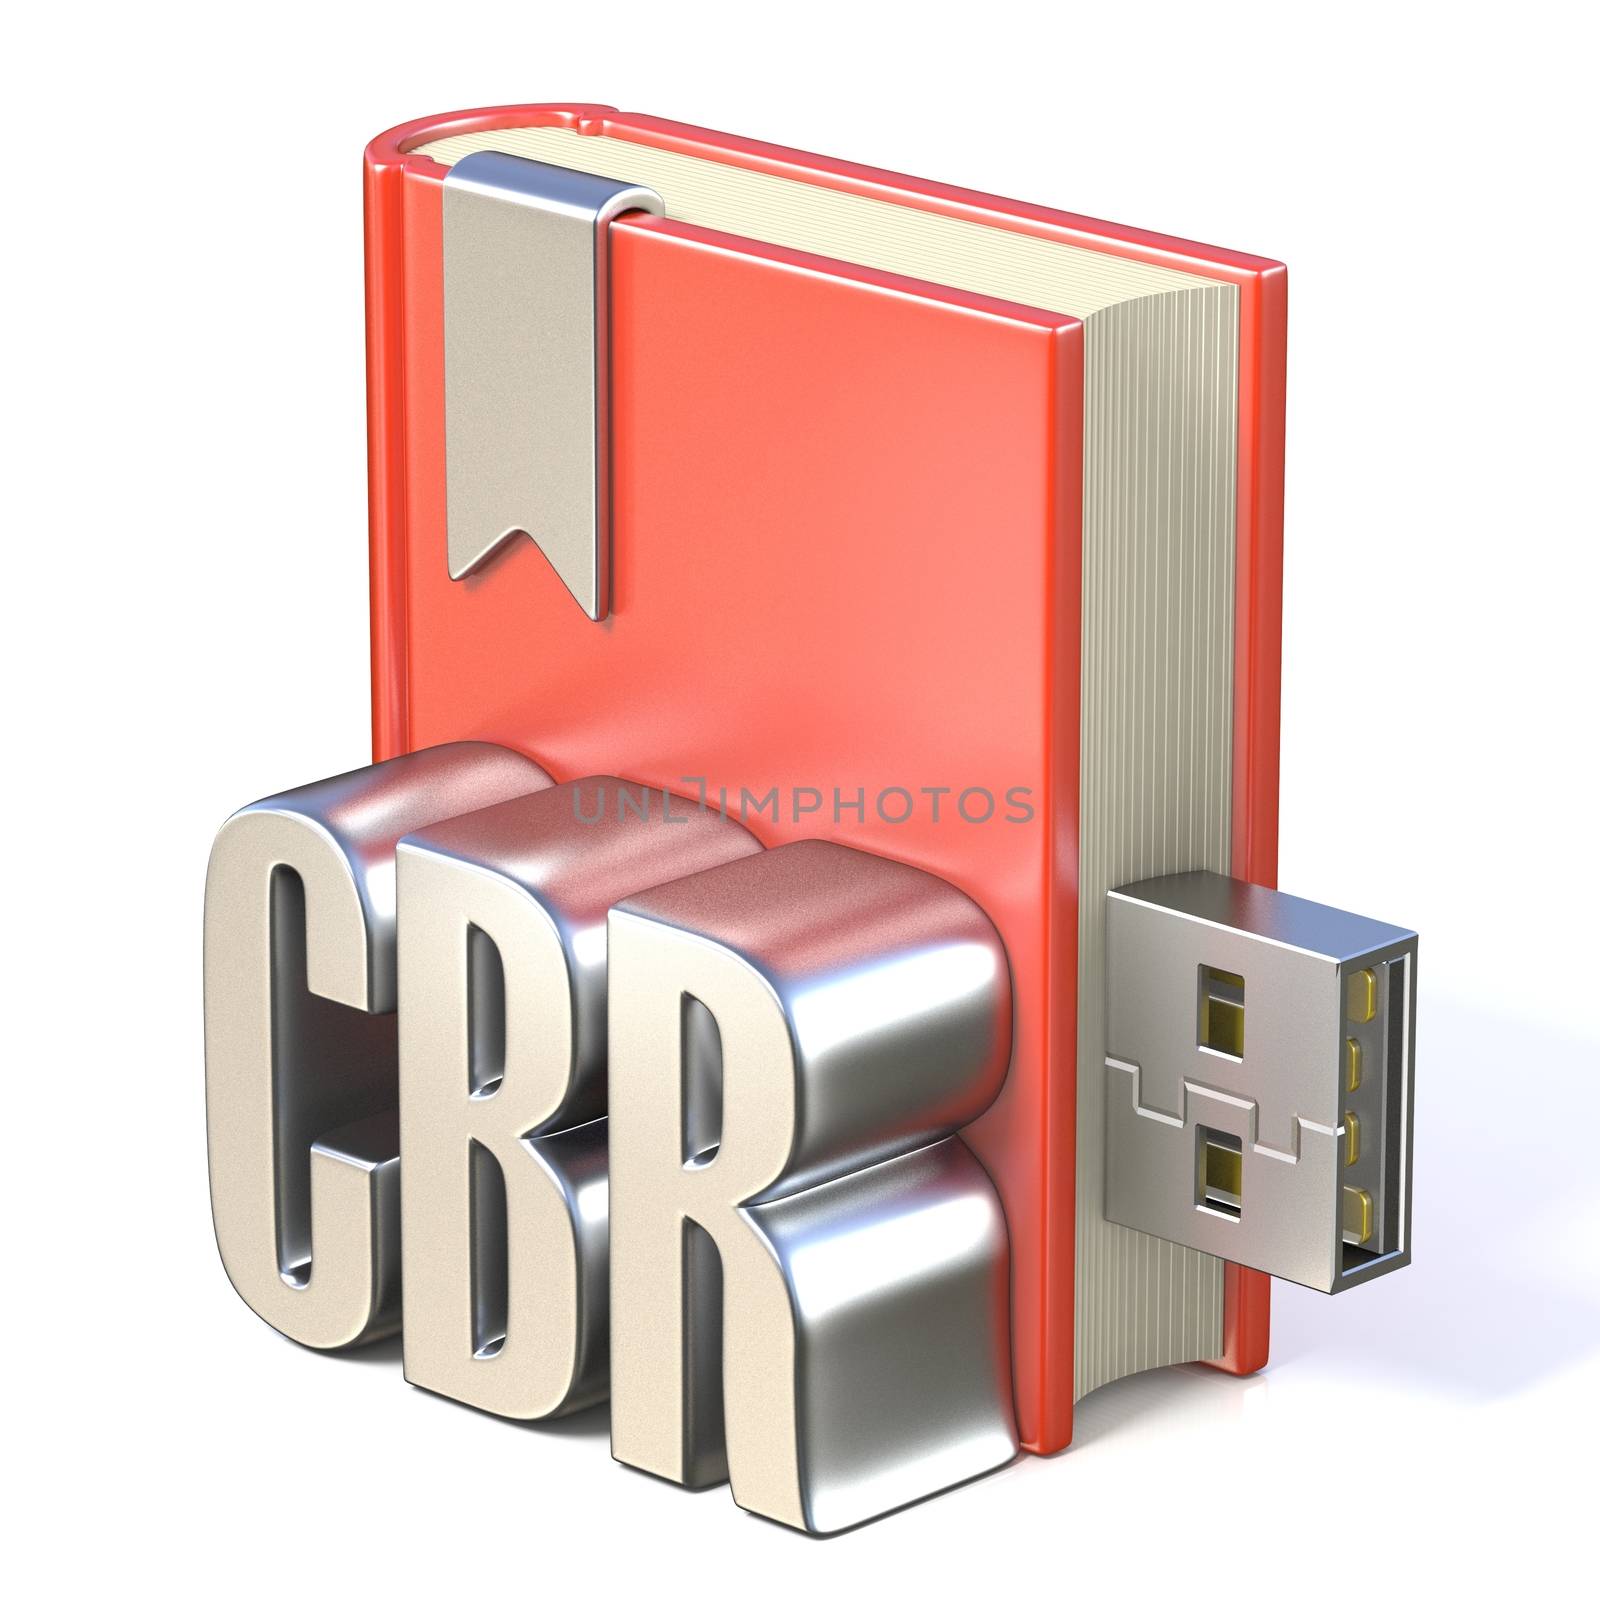 eBook icon metal CBR red book USB 3D render illustration isolated on white background